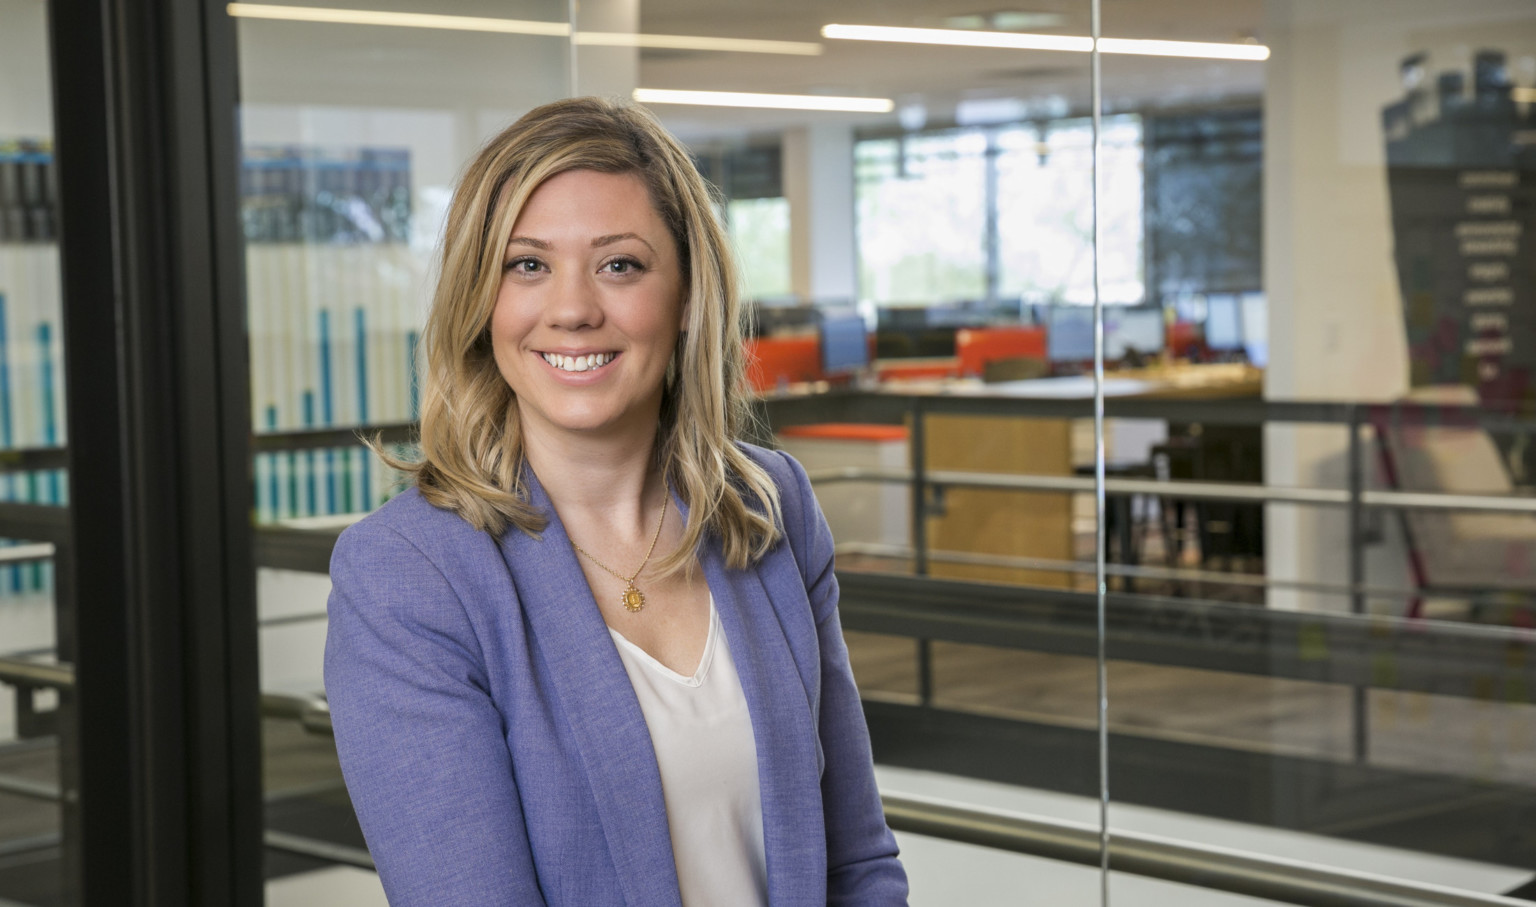 DLR Group Senior Associate and Campus Planner linsey graff, Assoc. AIA